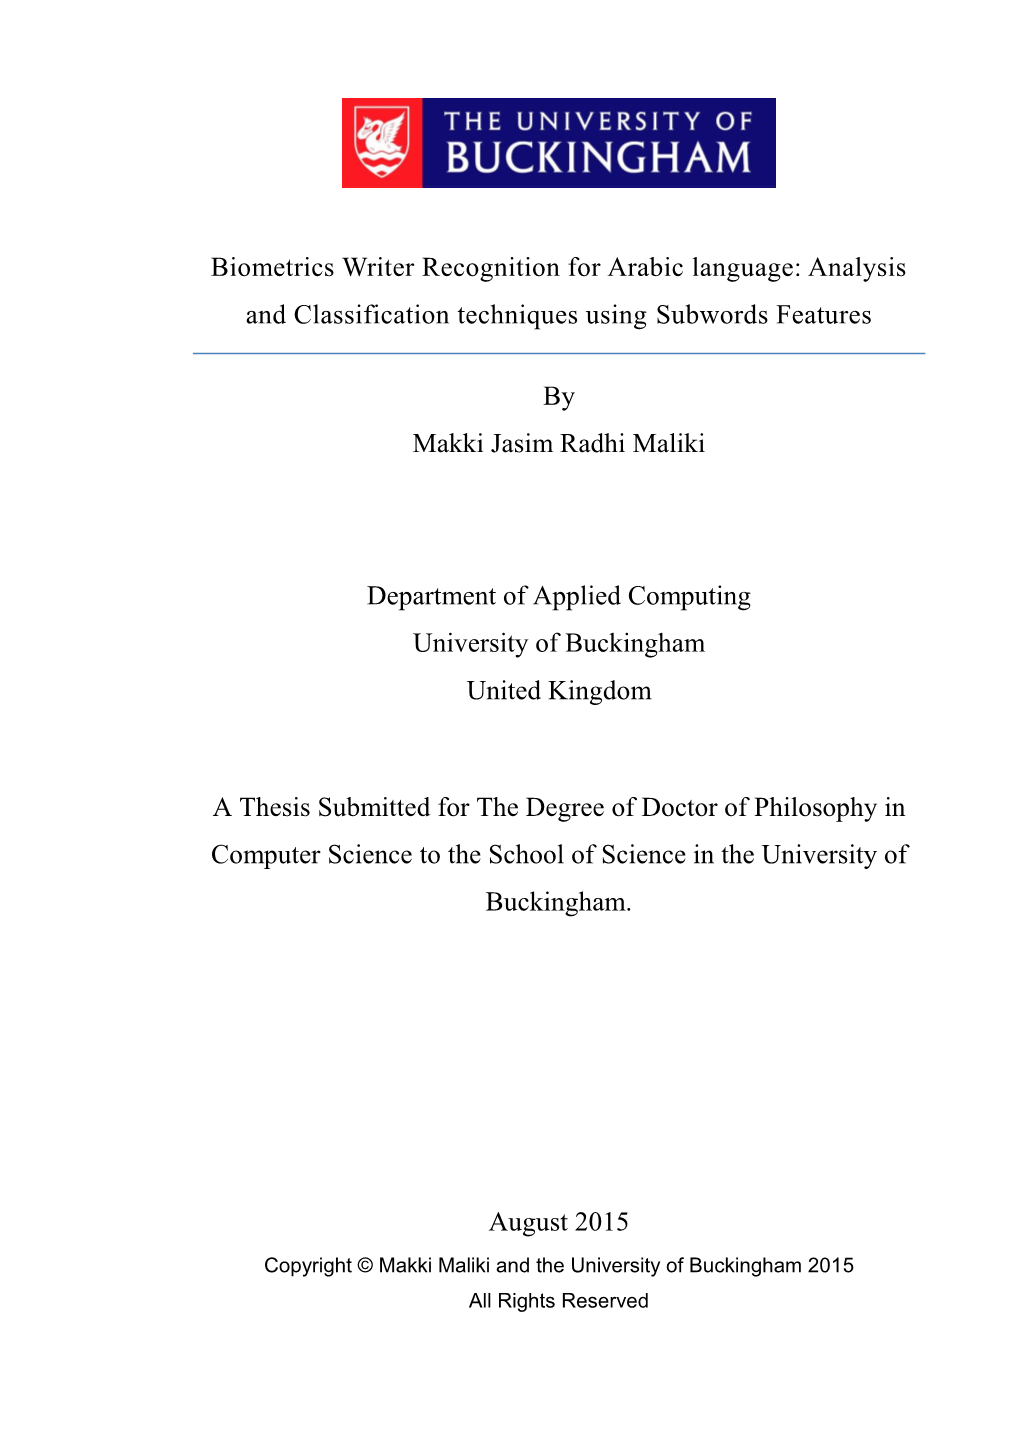 Biometrics Writer Recognition for Arabic Language: Analysis and Classification Techniques Using Subwords Features